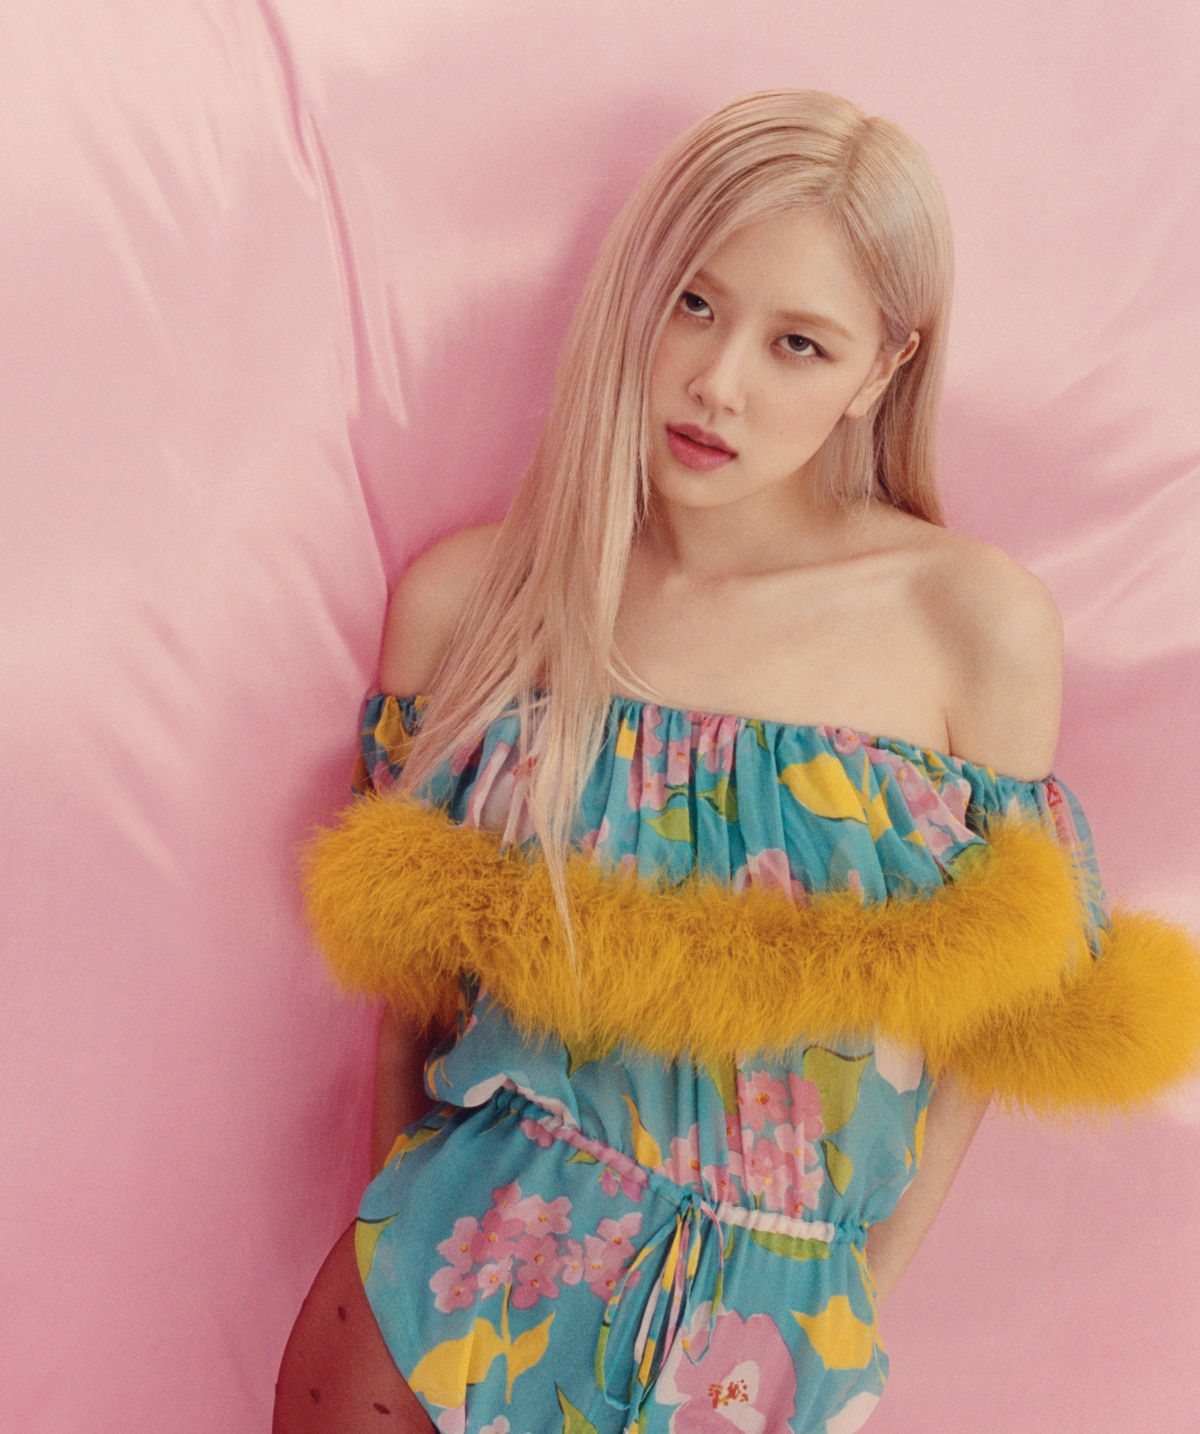 Blackpink'sRosé on the cover of Vogue Australia April 2021. Photographed by Peter Ash Lee. Styled by Christine Centenera.